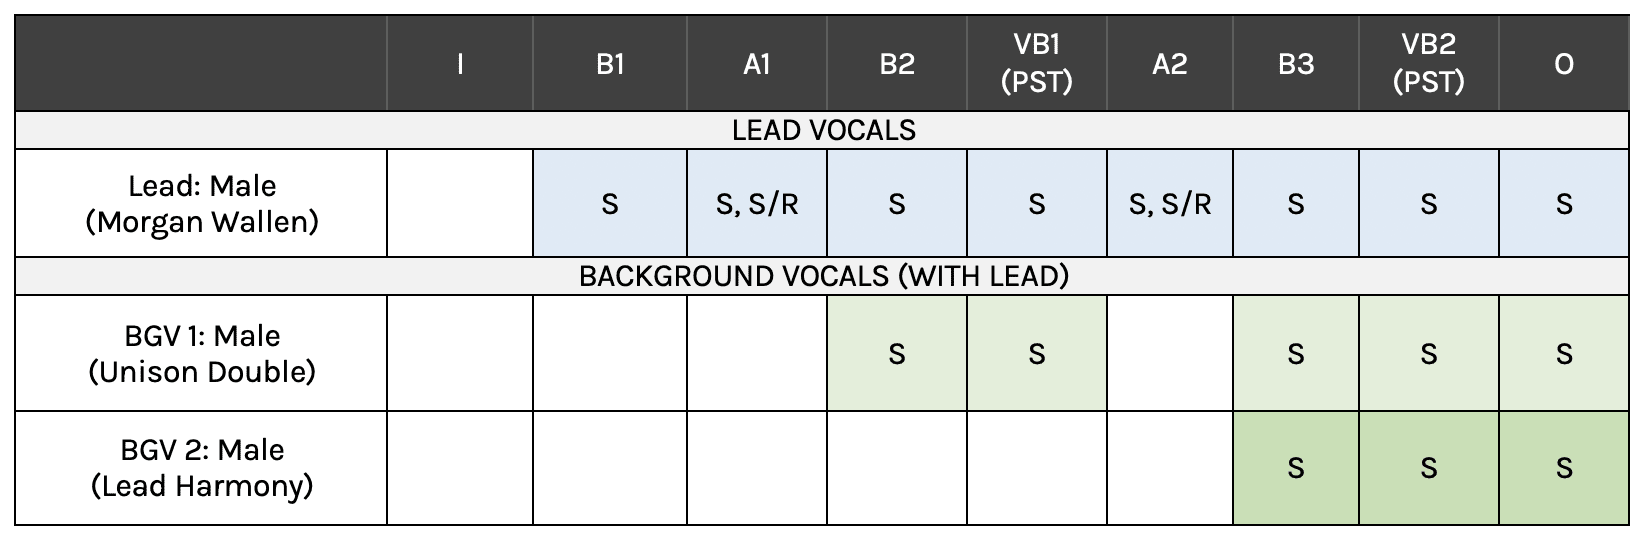 Last Night Vocal Production Overview Table